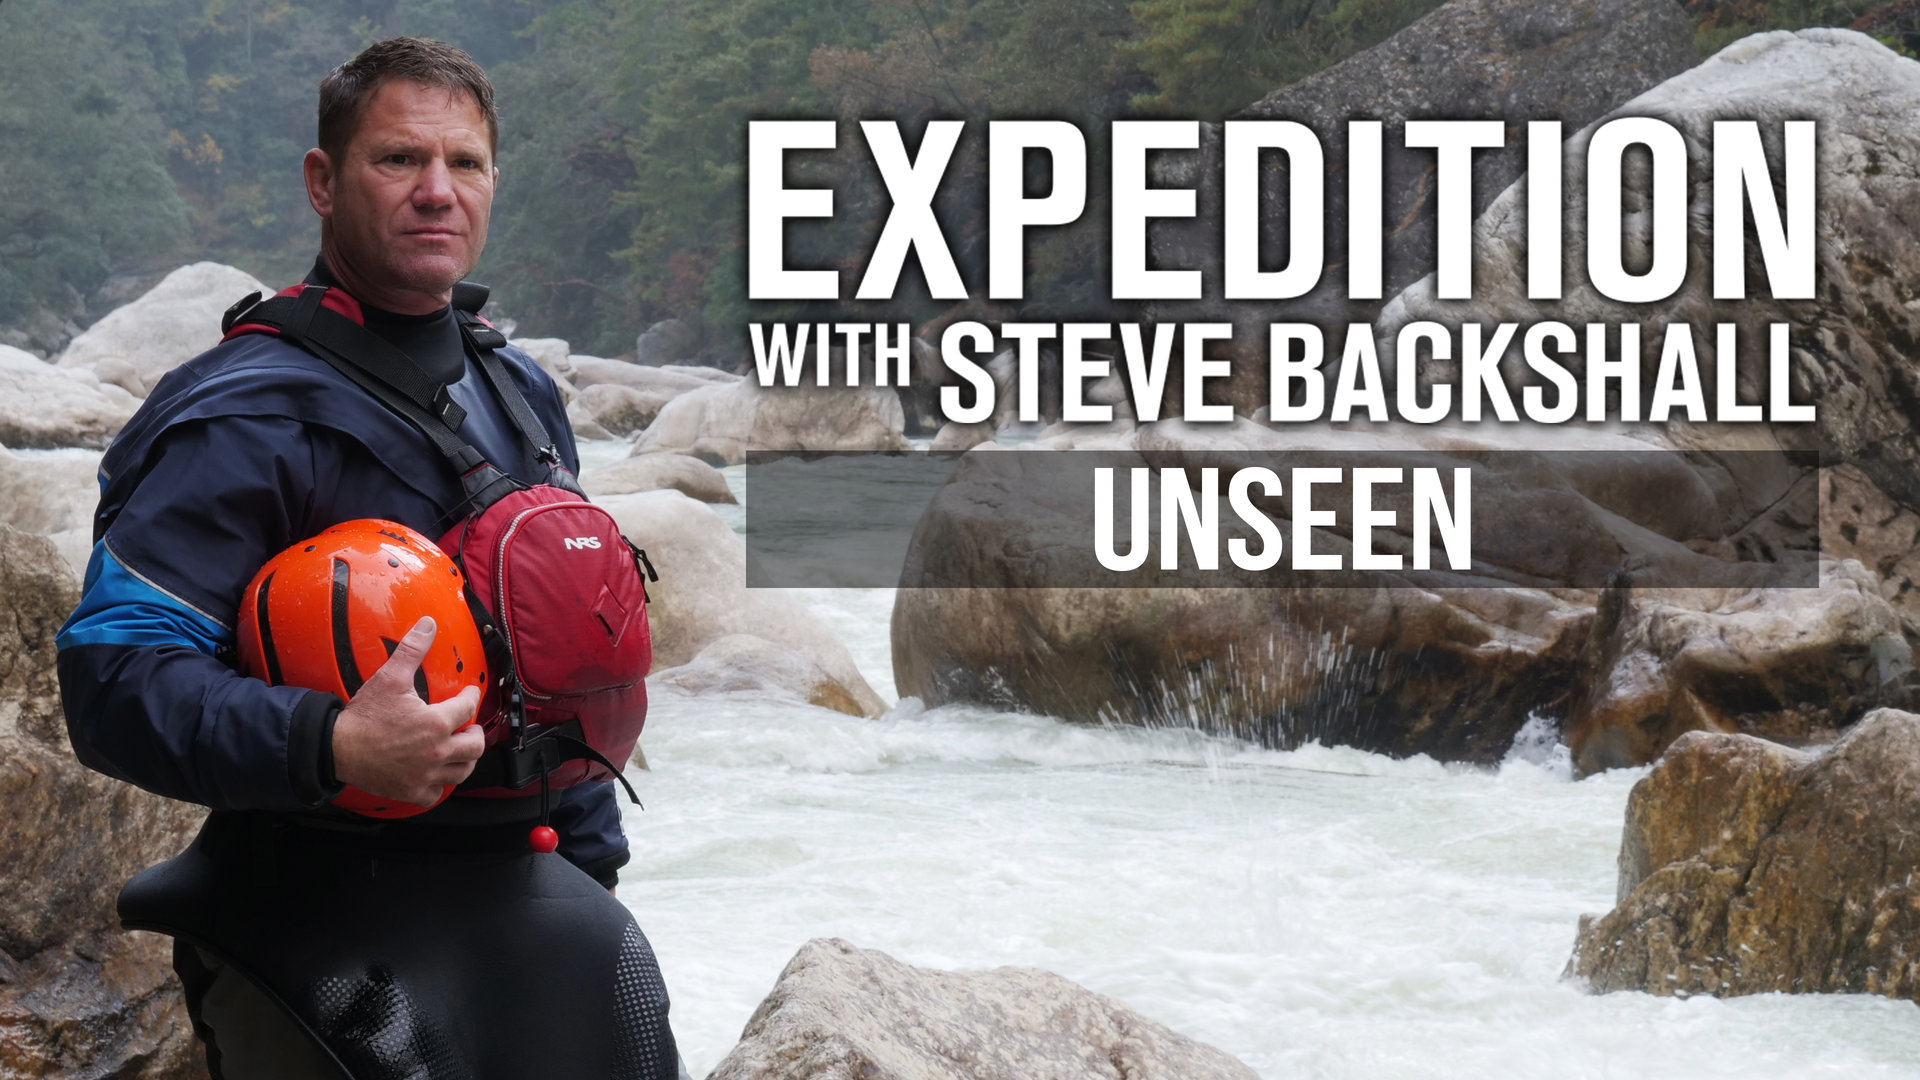 Expedition With Steve Backshall Unseen Series 1 Episode 1 Suriname Lost World The